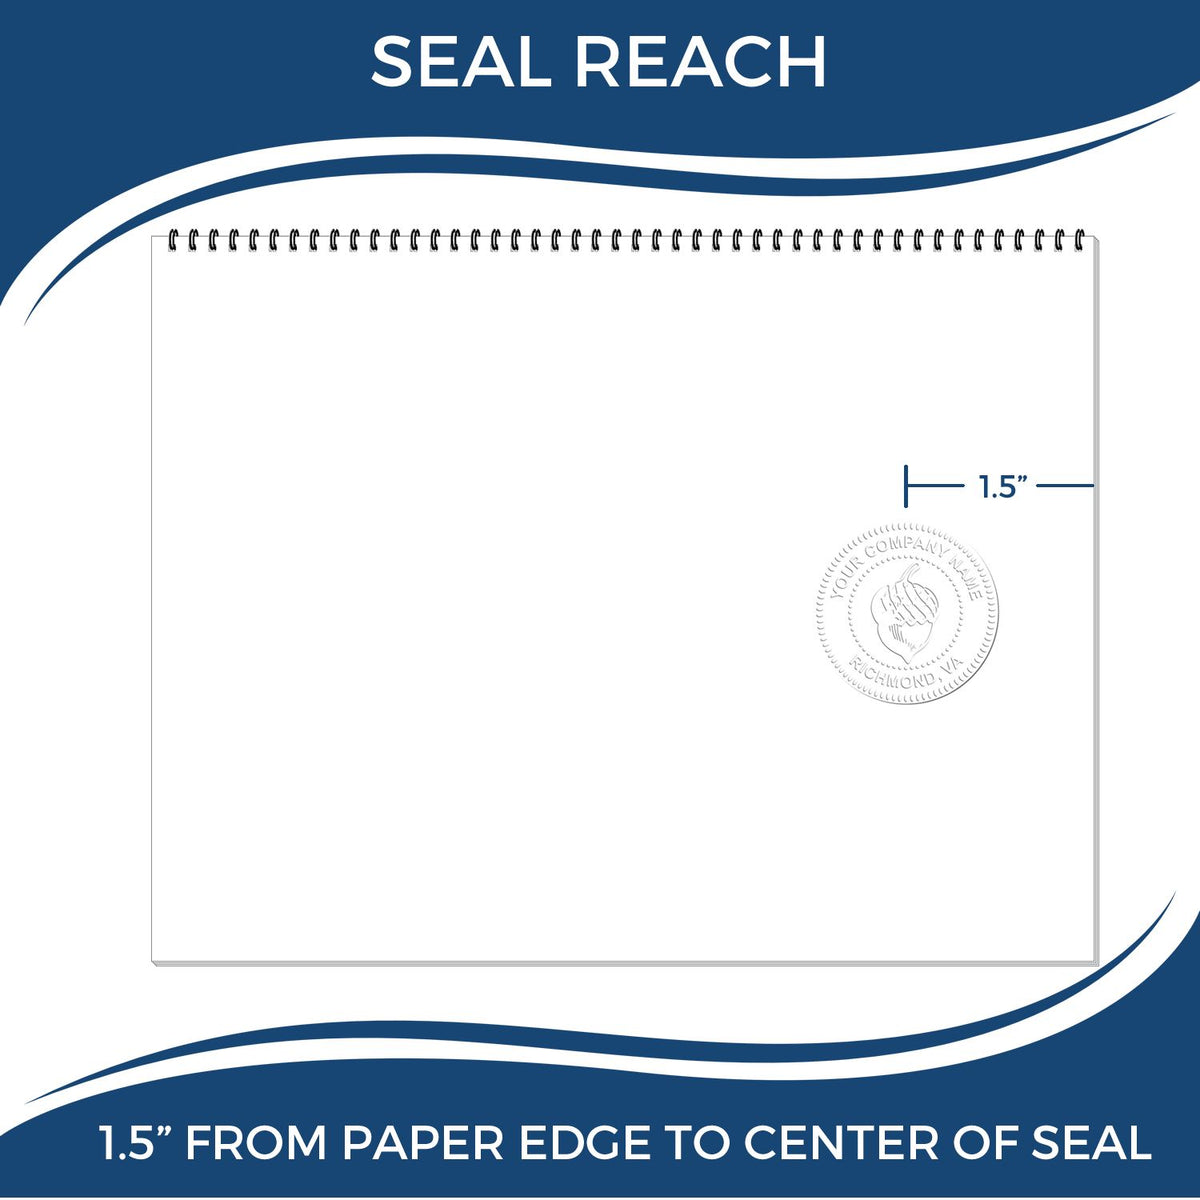 An infographic showing the seal reach which is represented by a ruler and a miniature seal image of the Gift Michigan Geologist Seal